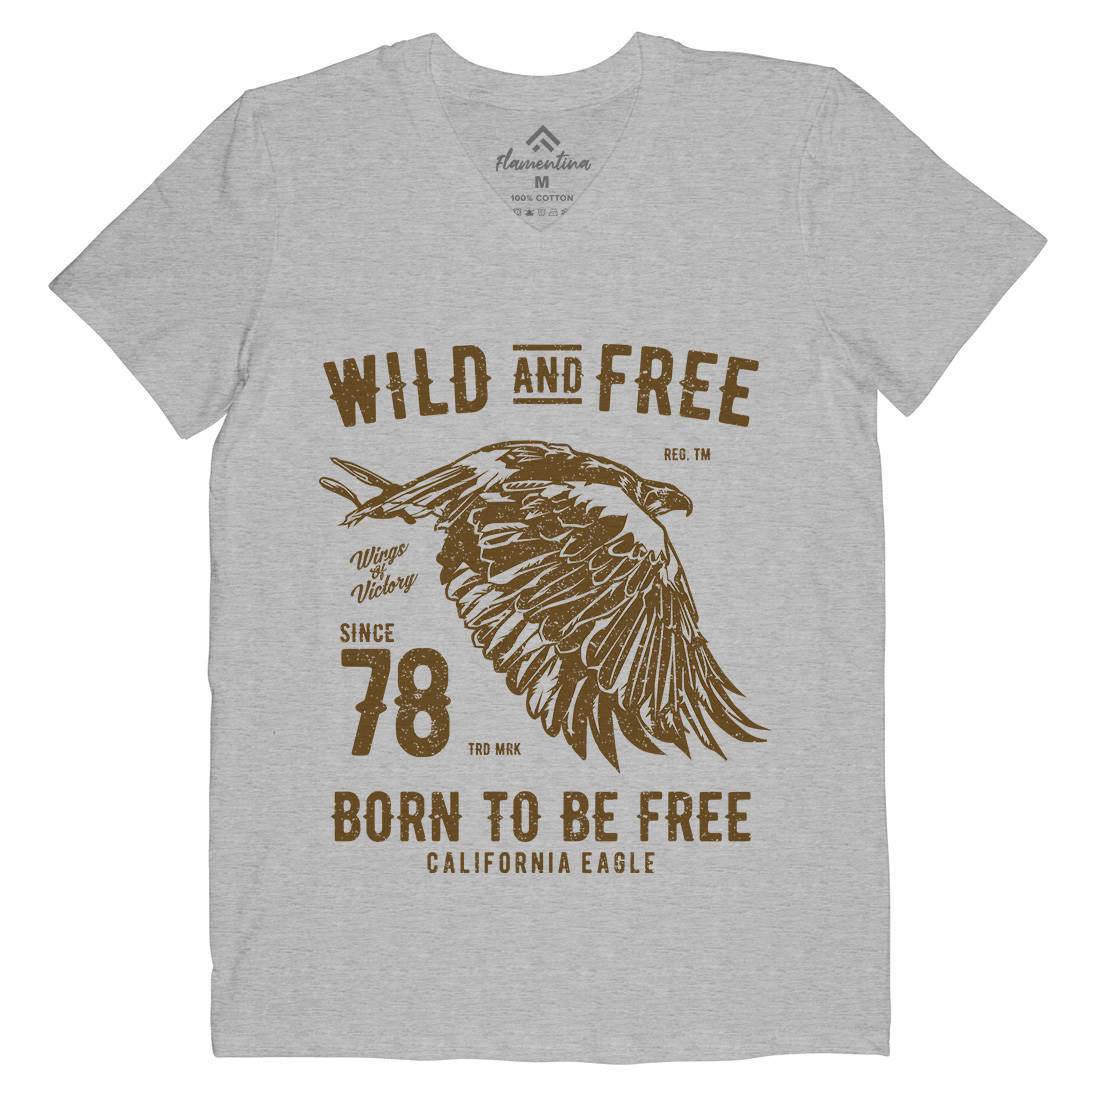 Wild And Free Mens Organic V-Neck T-Shirt Army A792